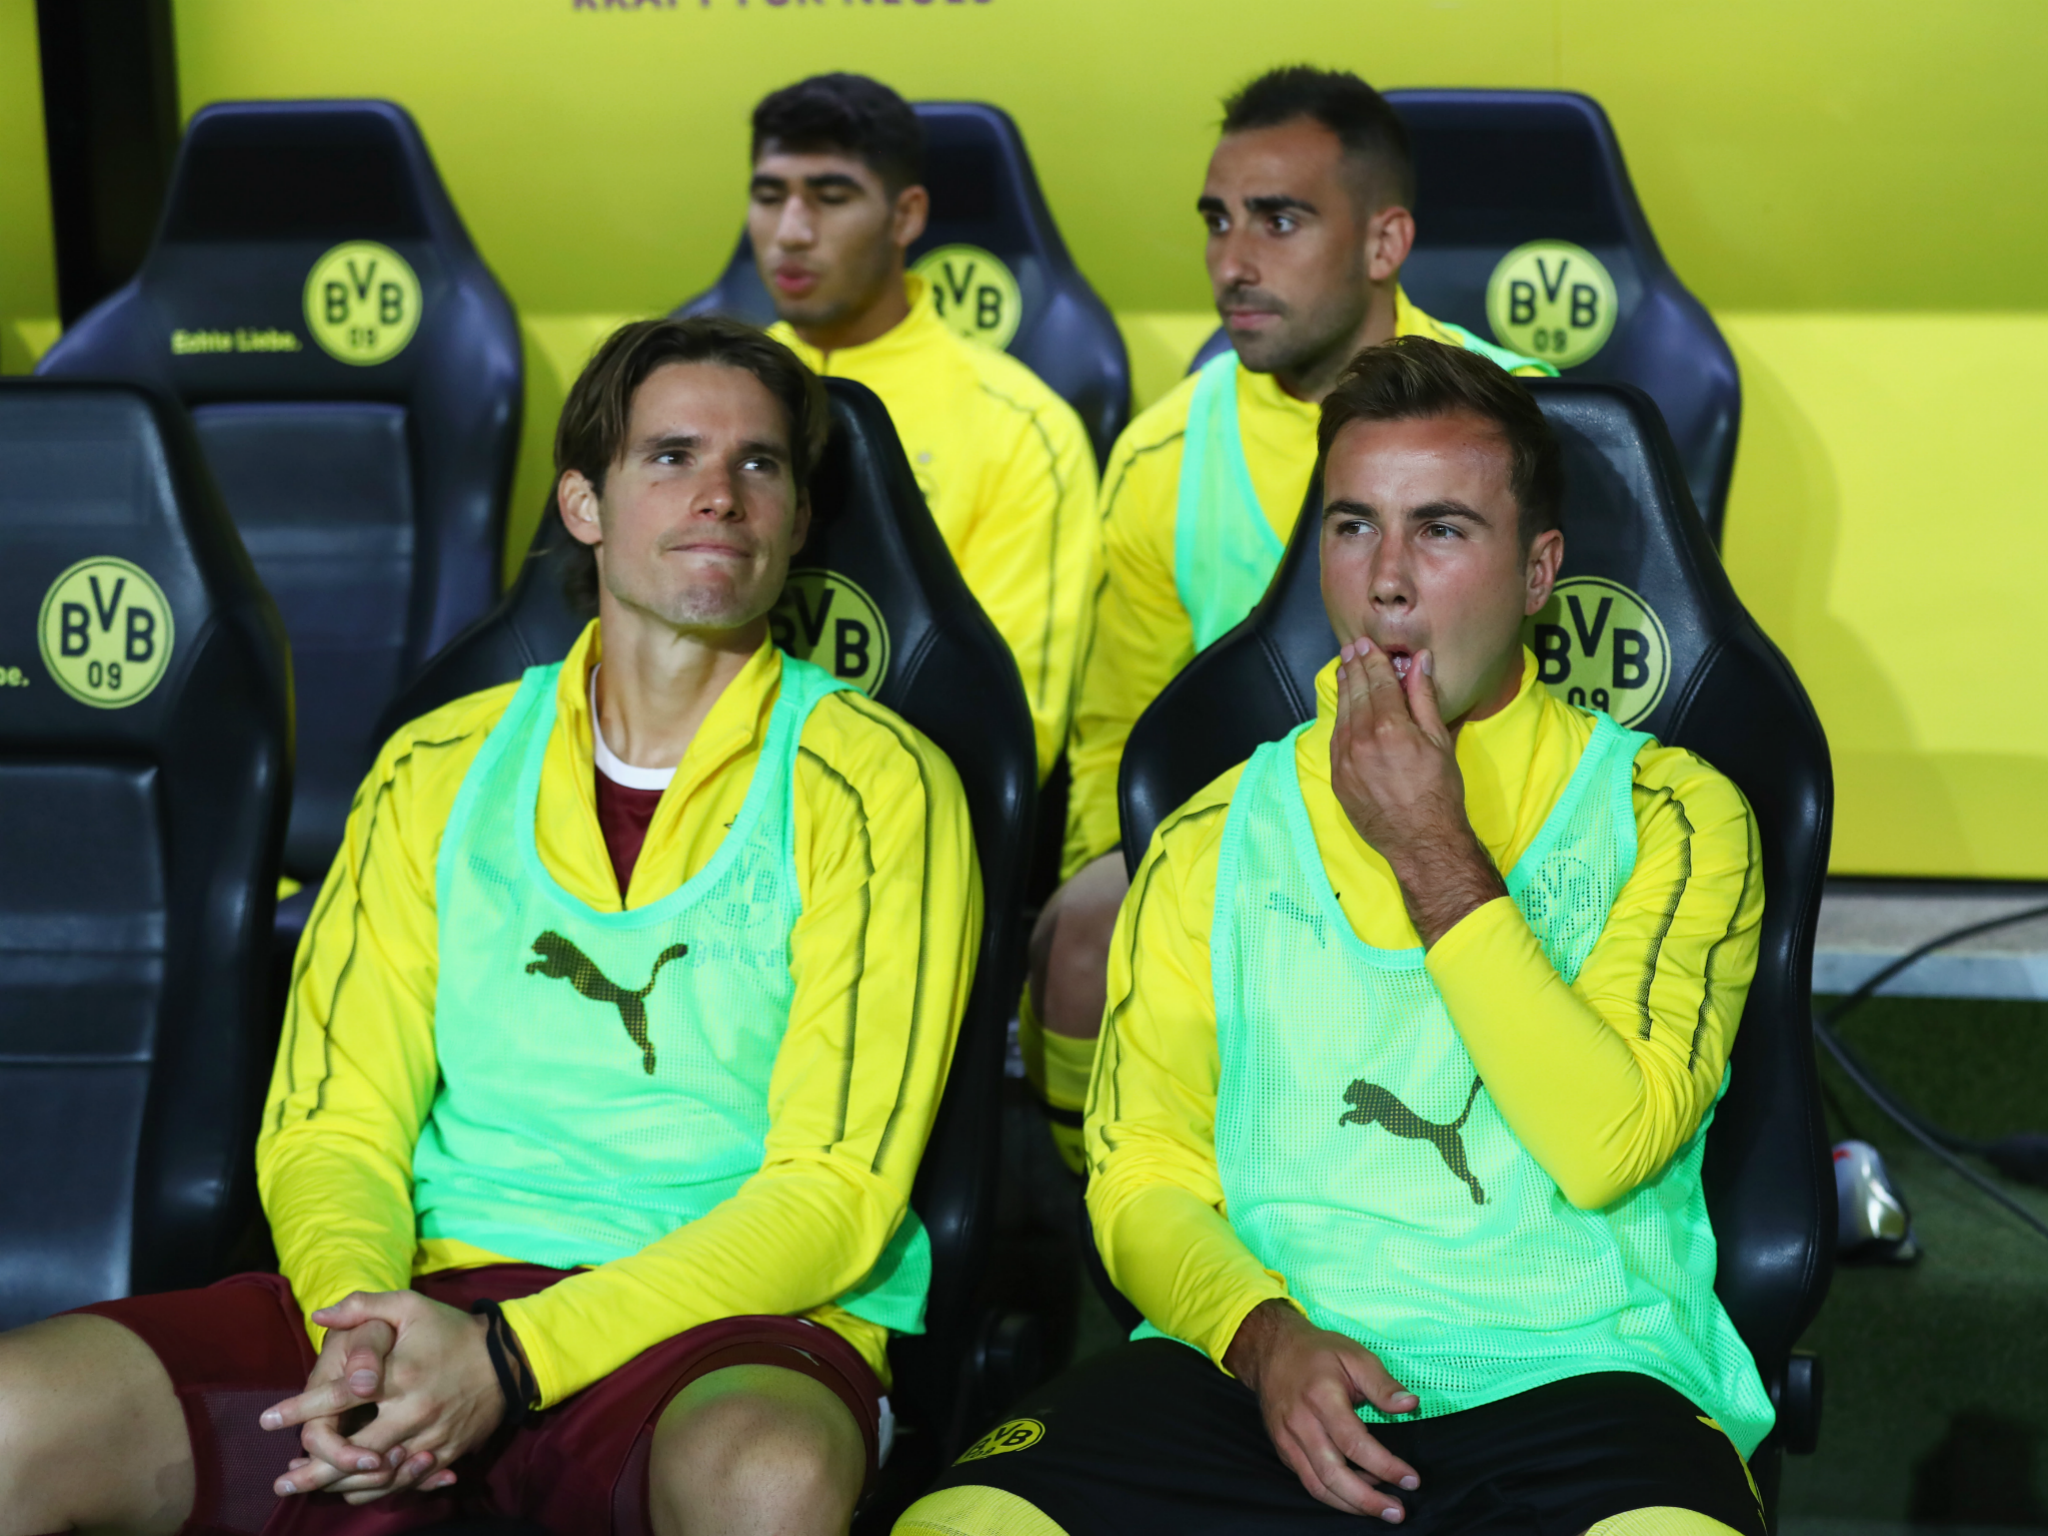 Gotze?has struggled to live up to his early promise at Dortmund and Bayern